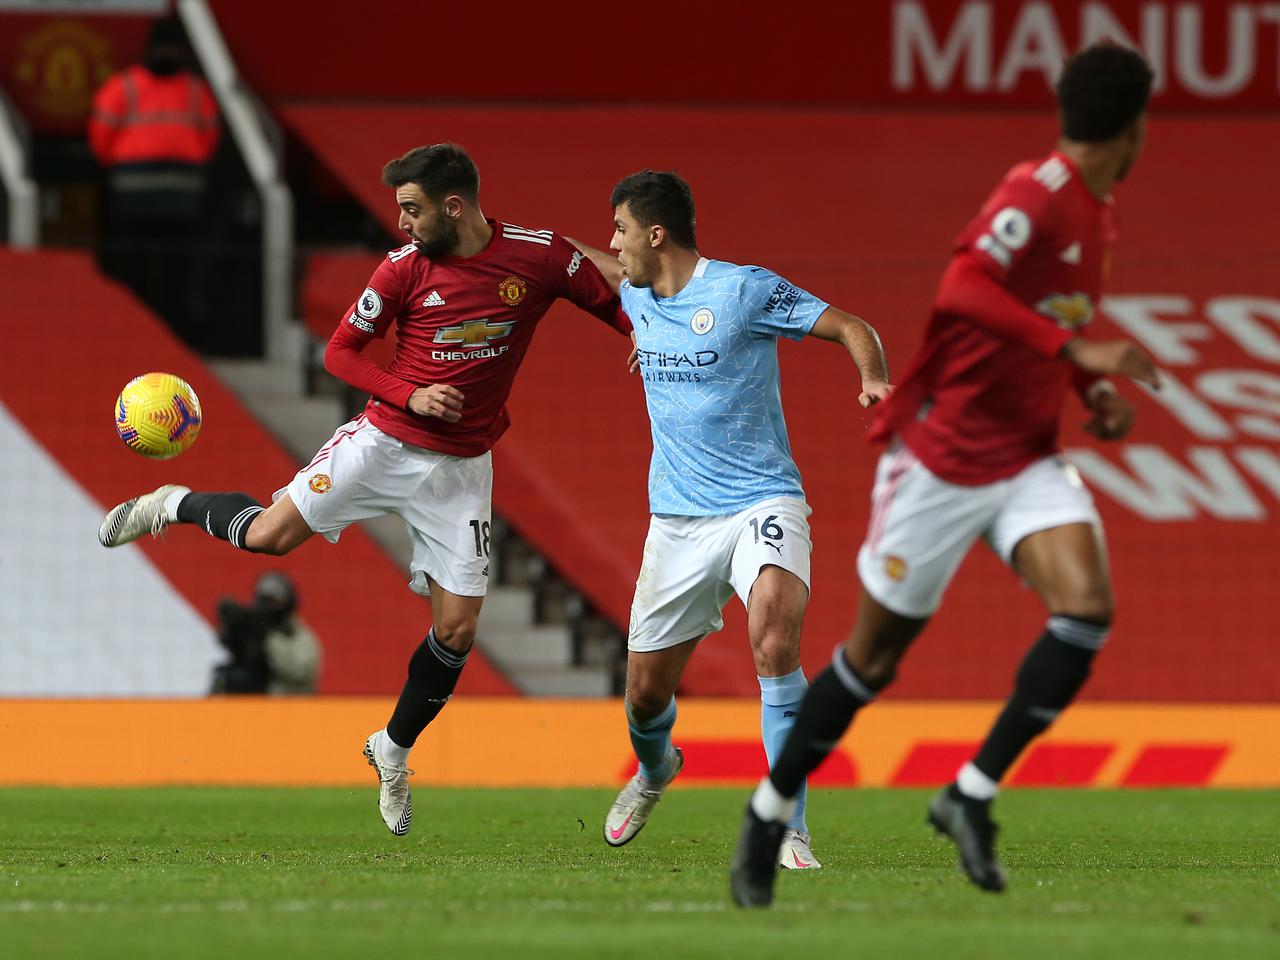 Match report: Man United 0 Manchester City 0 | Manchester United